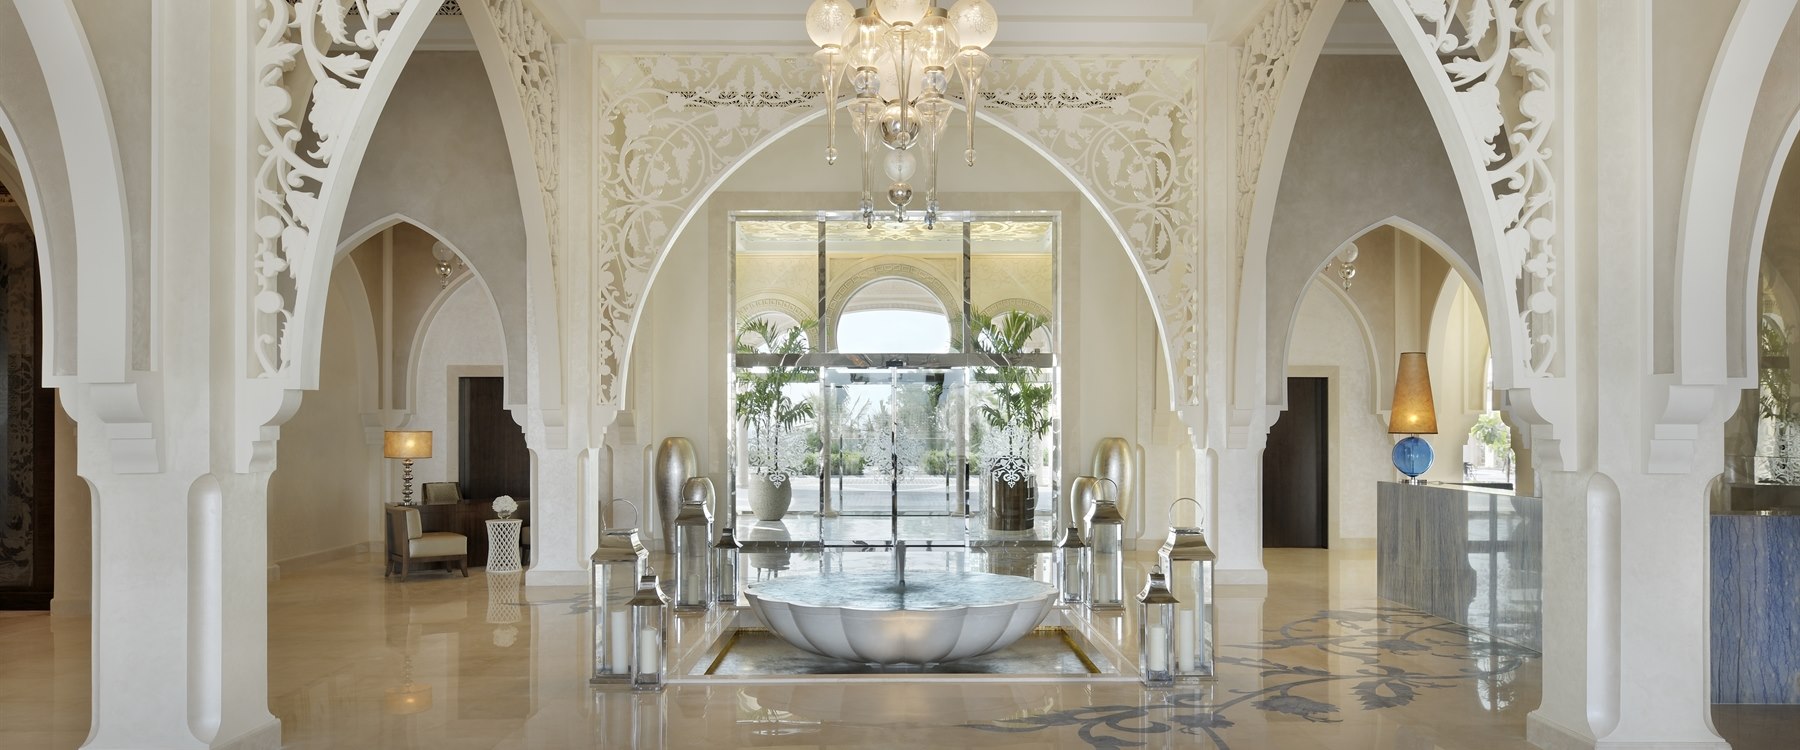 Lobby at One&Only The Palm, Dubai